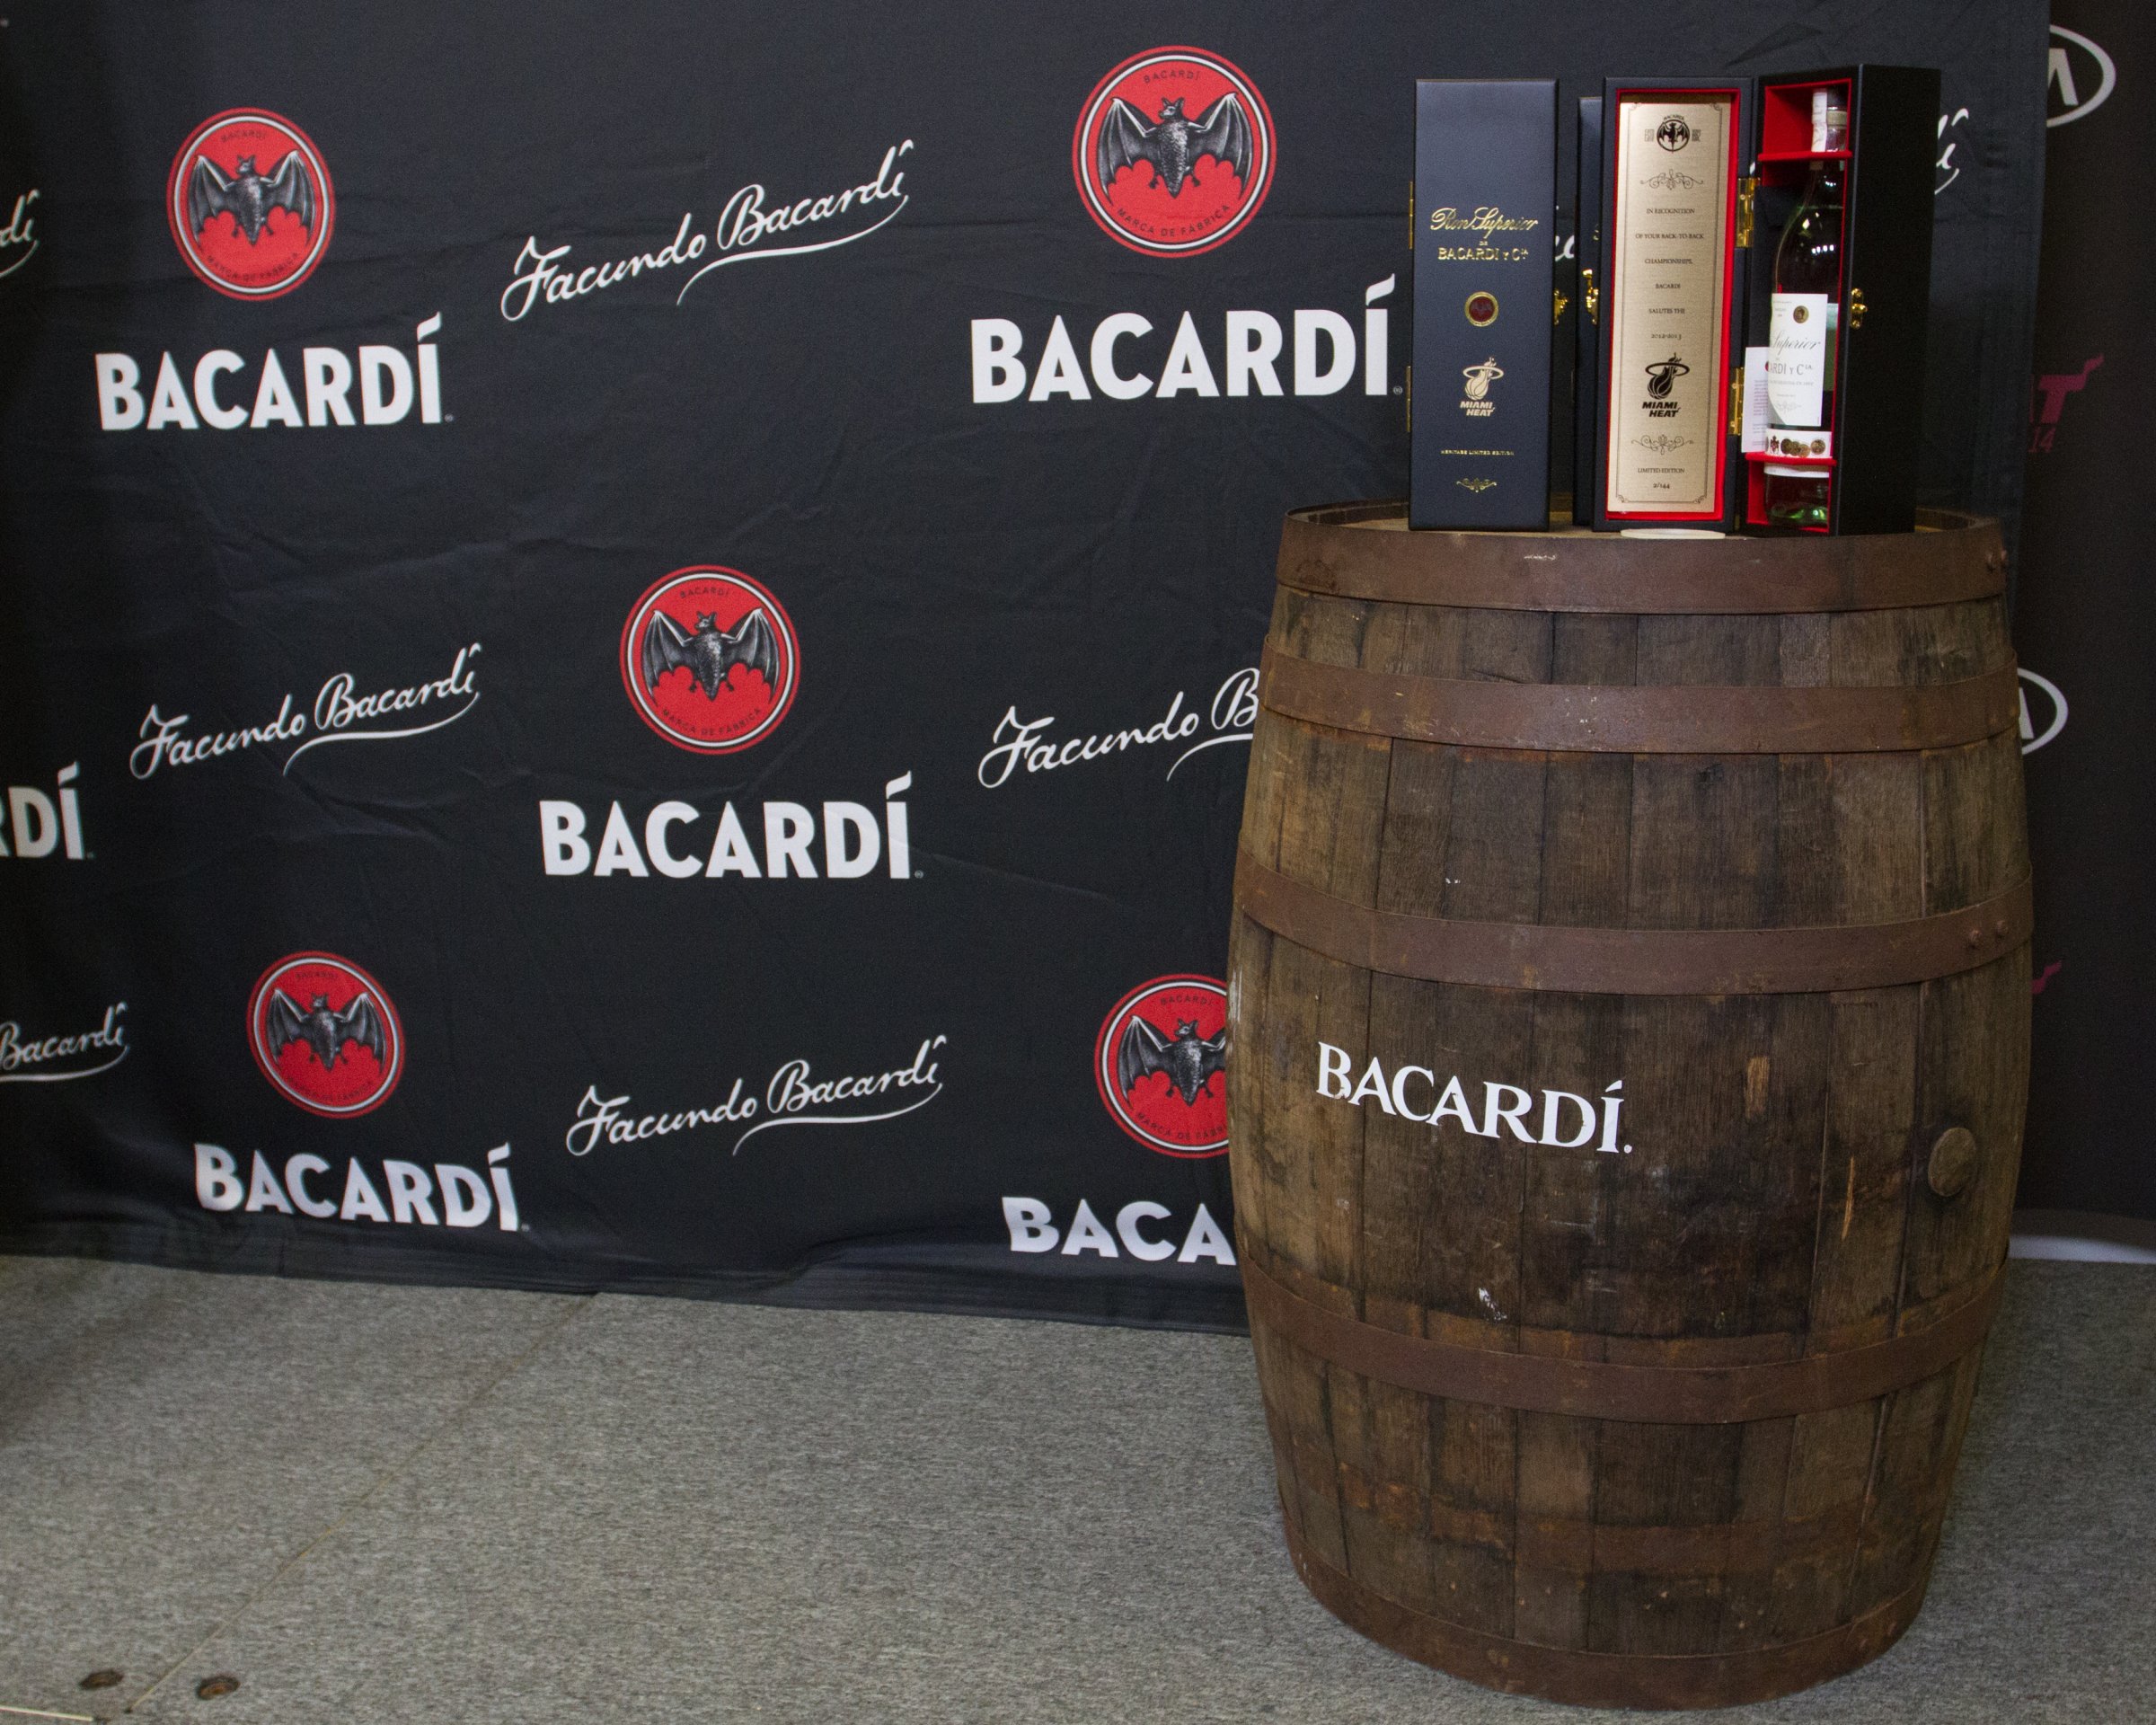 A limited-edition bottle of BACARDI Superior rum on Dec. 18, 2013 in Miami, Florida.